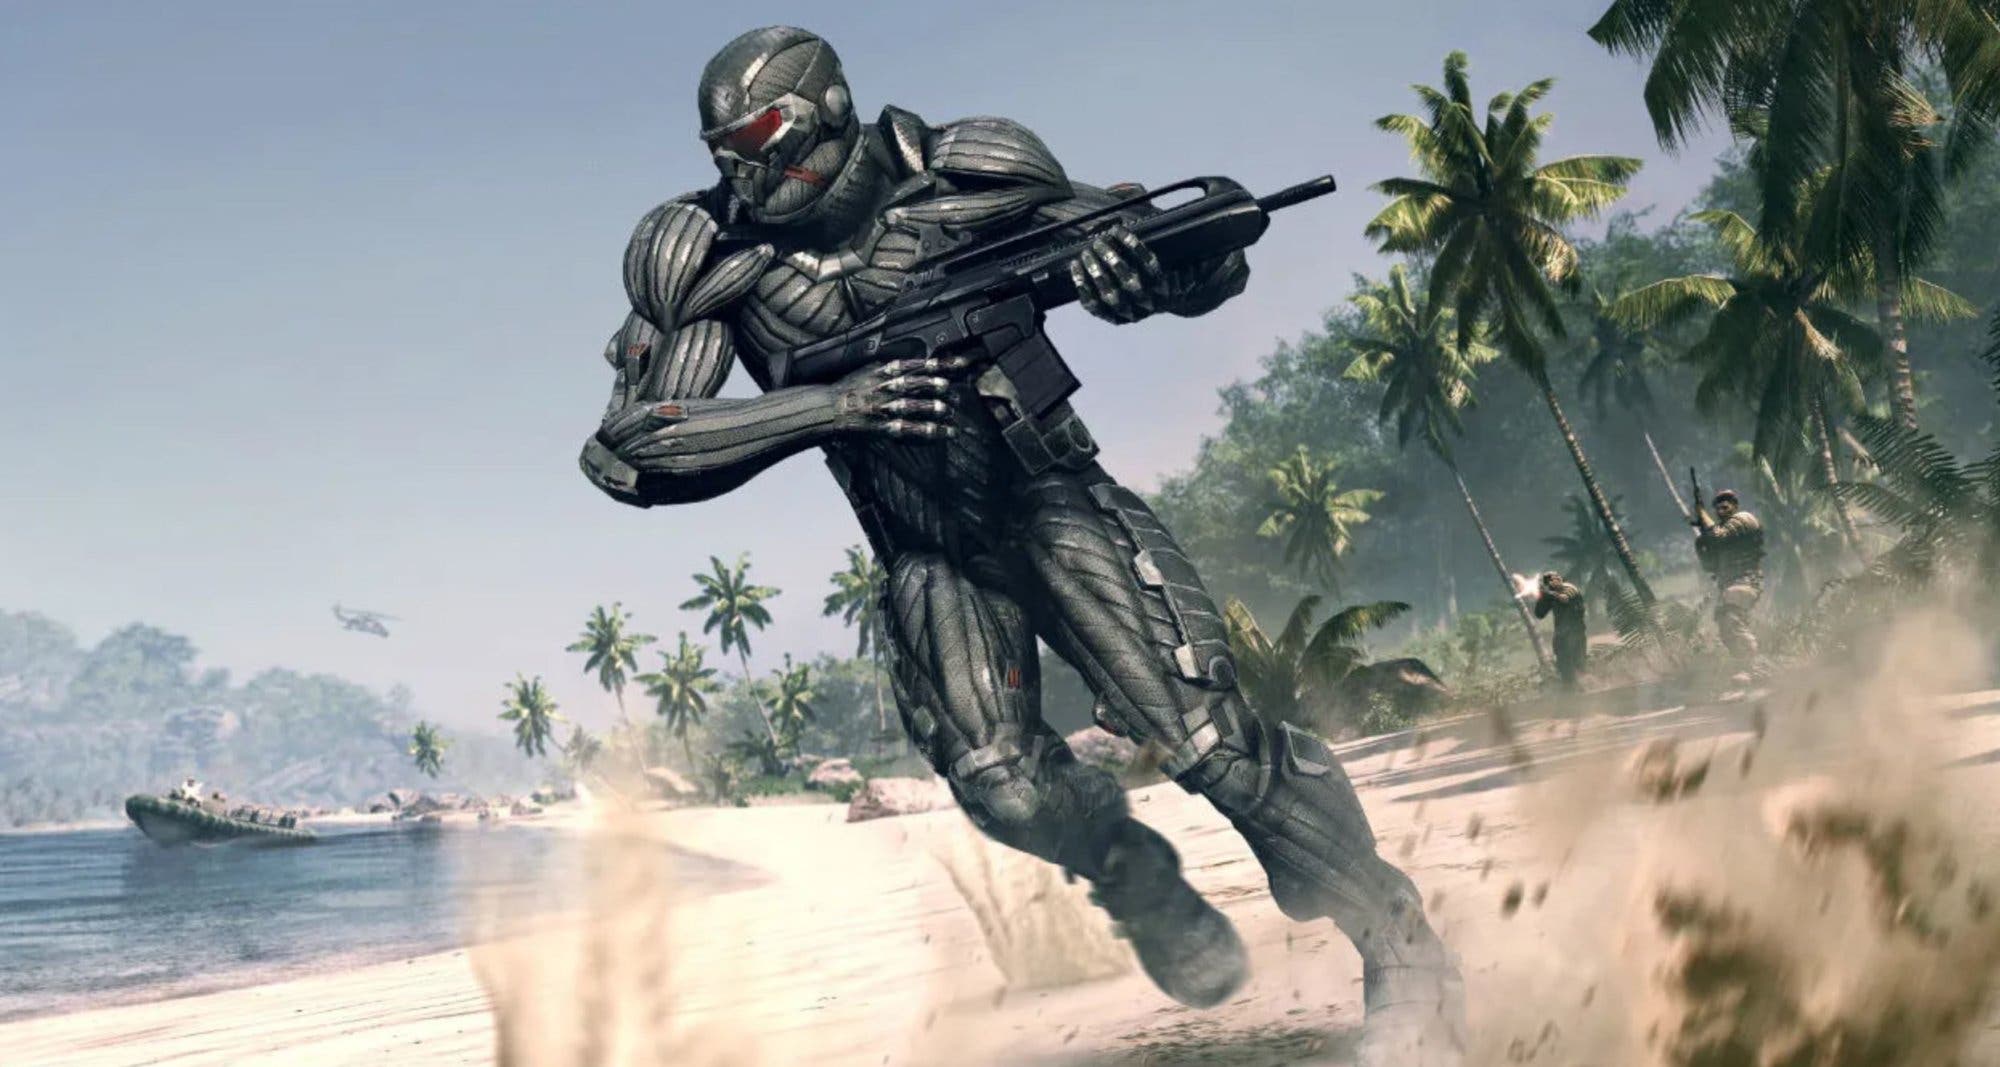 download crysis 3 nintendo switch for free